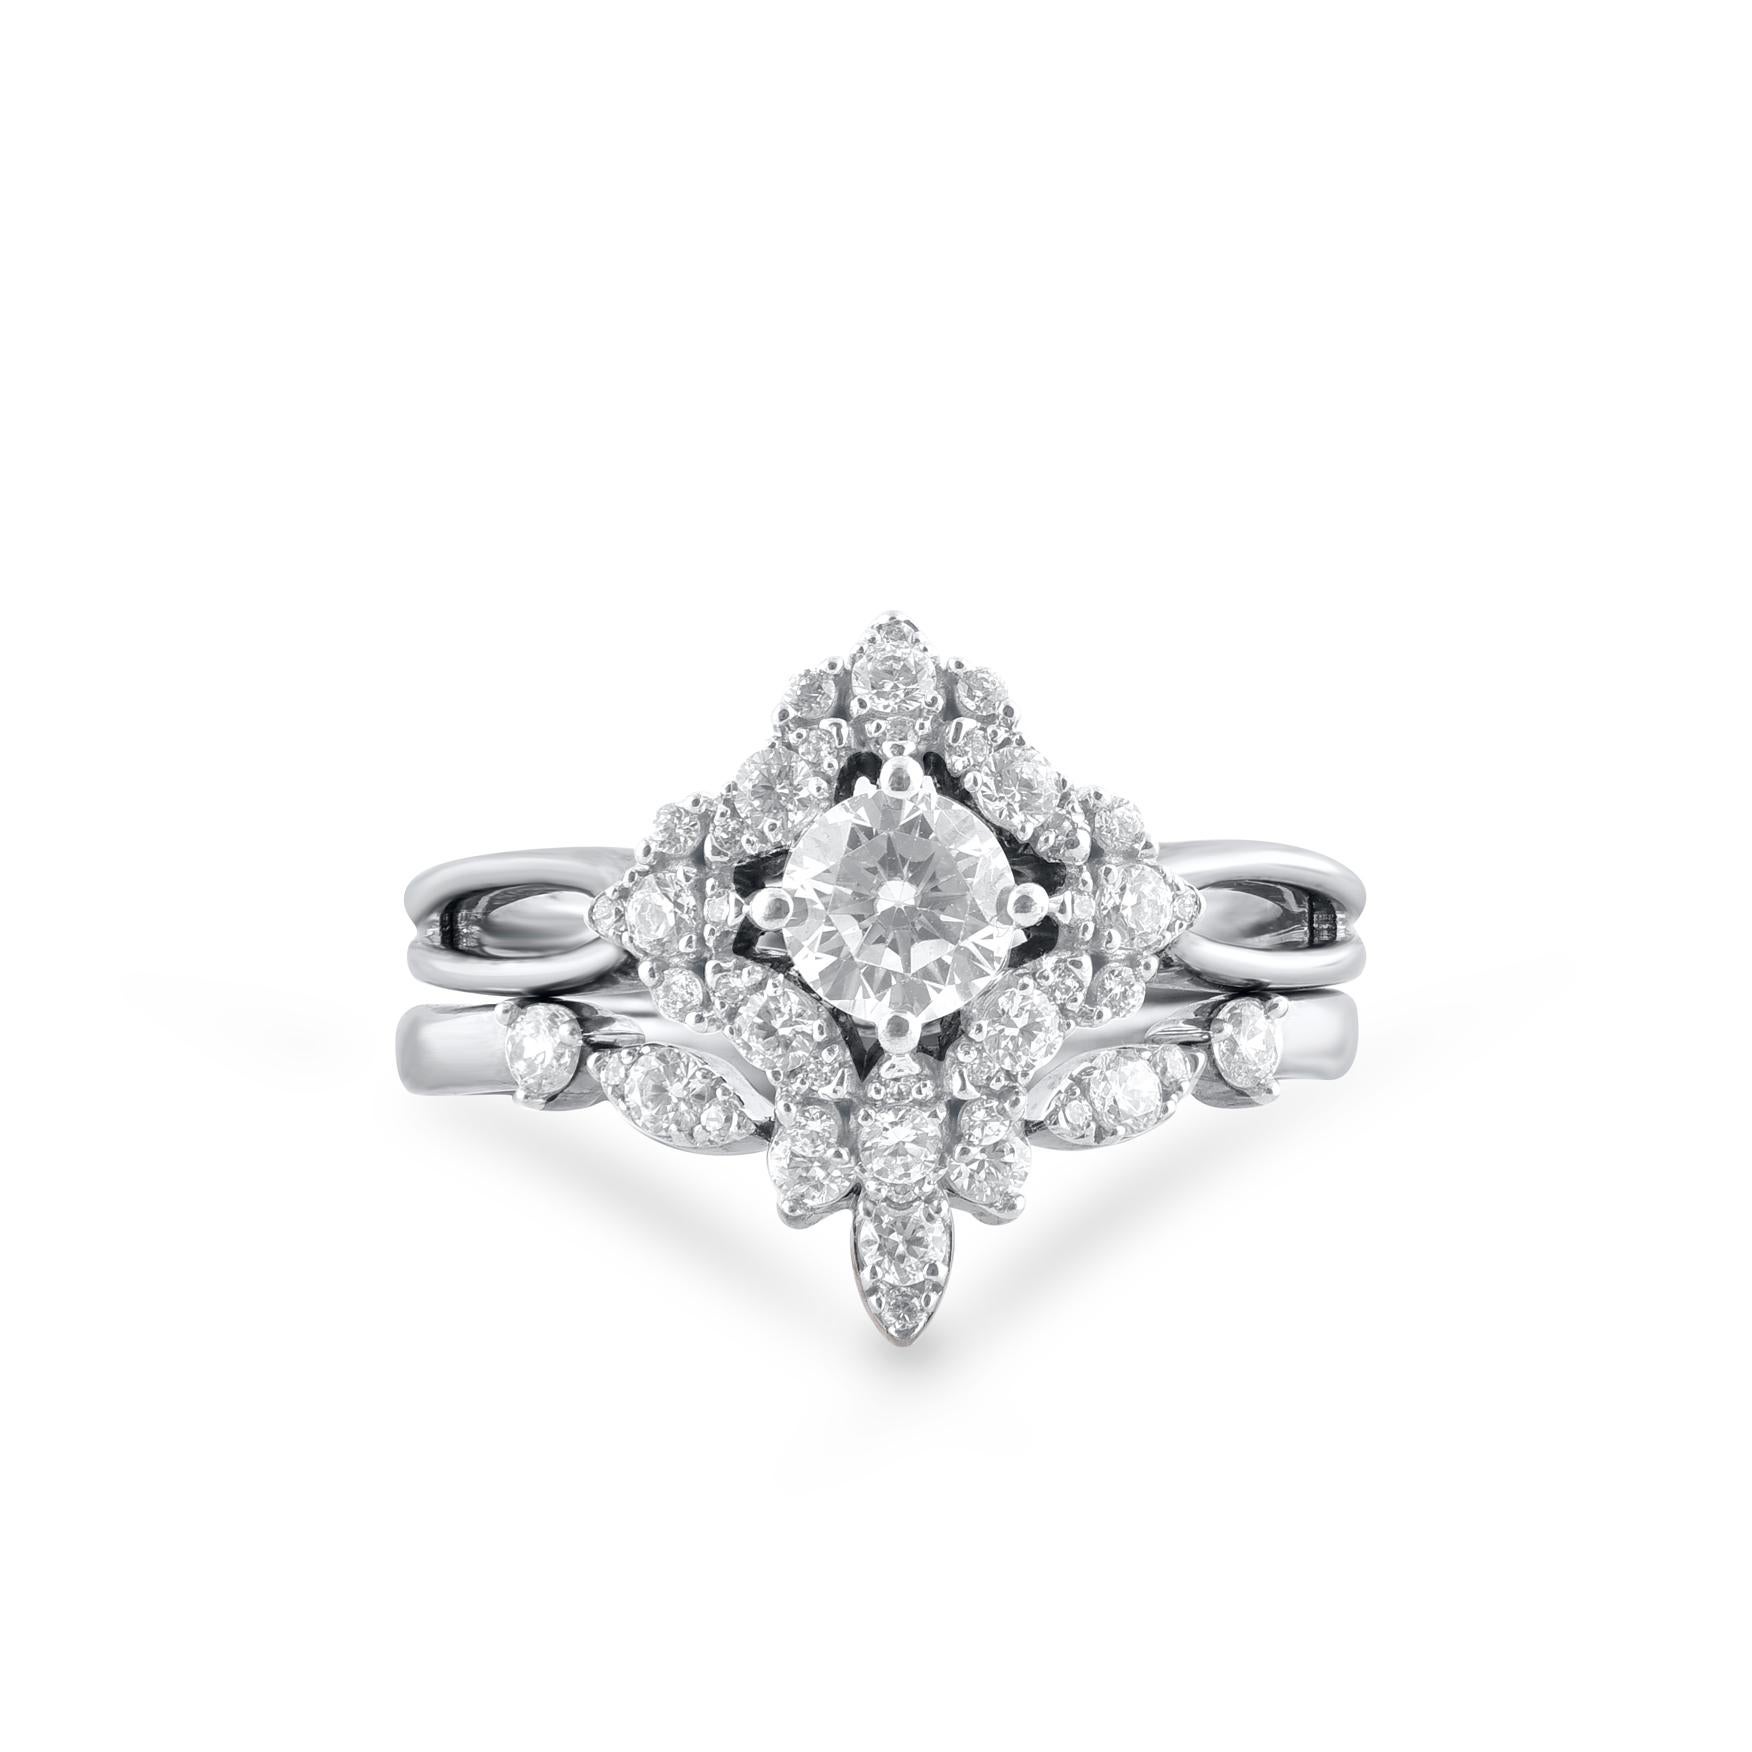 Give her a beautiful symbol of your love with this vintage style diamond bridal ring set. Crafted in 14 Karat white gold. This wedding ring features a sparkling 46 brilliant cut and single cut round diamond beautifully set in prong setting. The